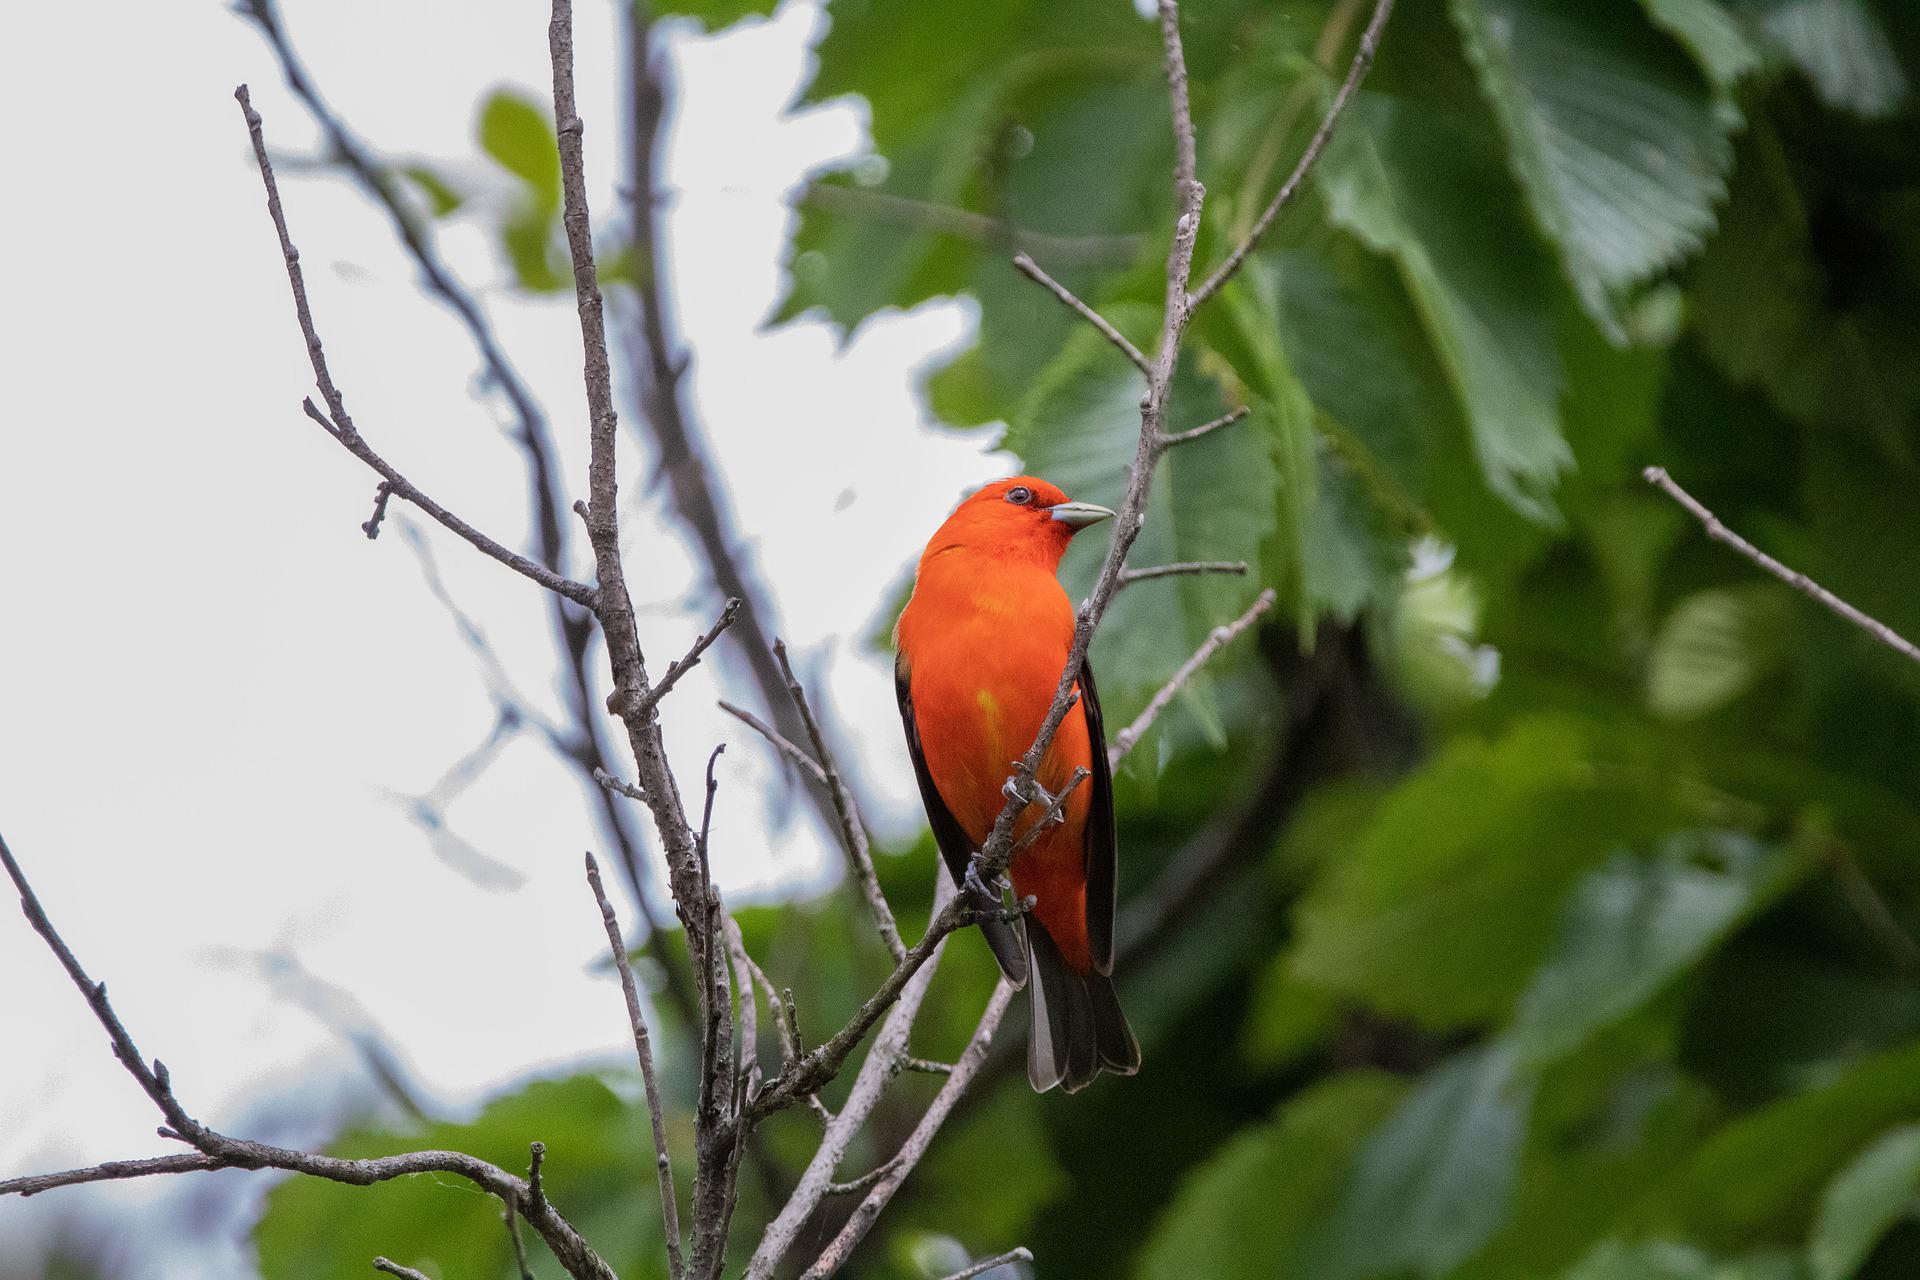 Scarlet tanager on tree branch.